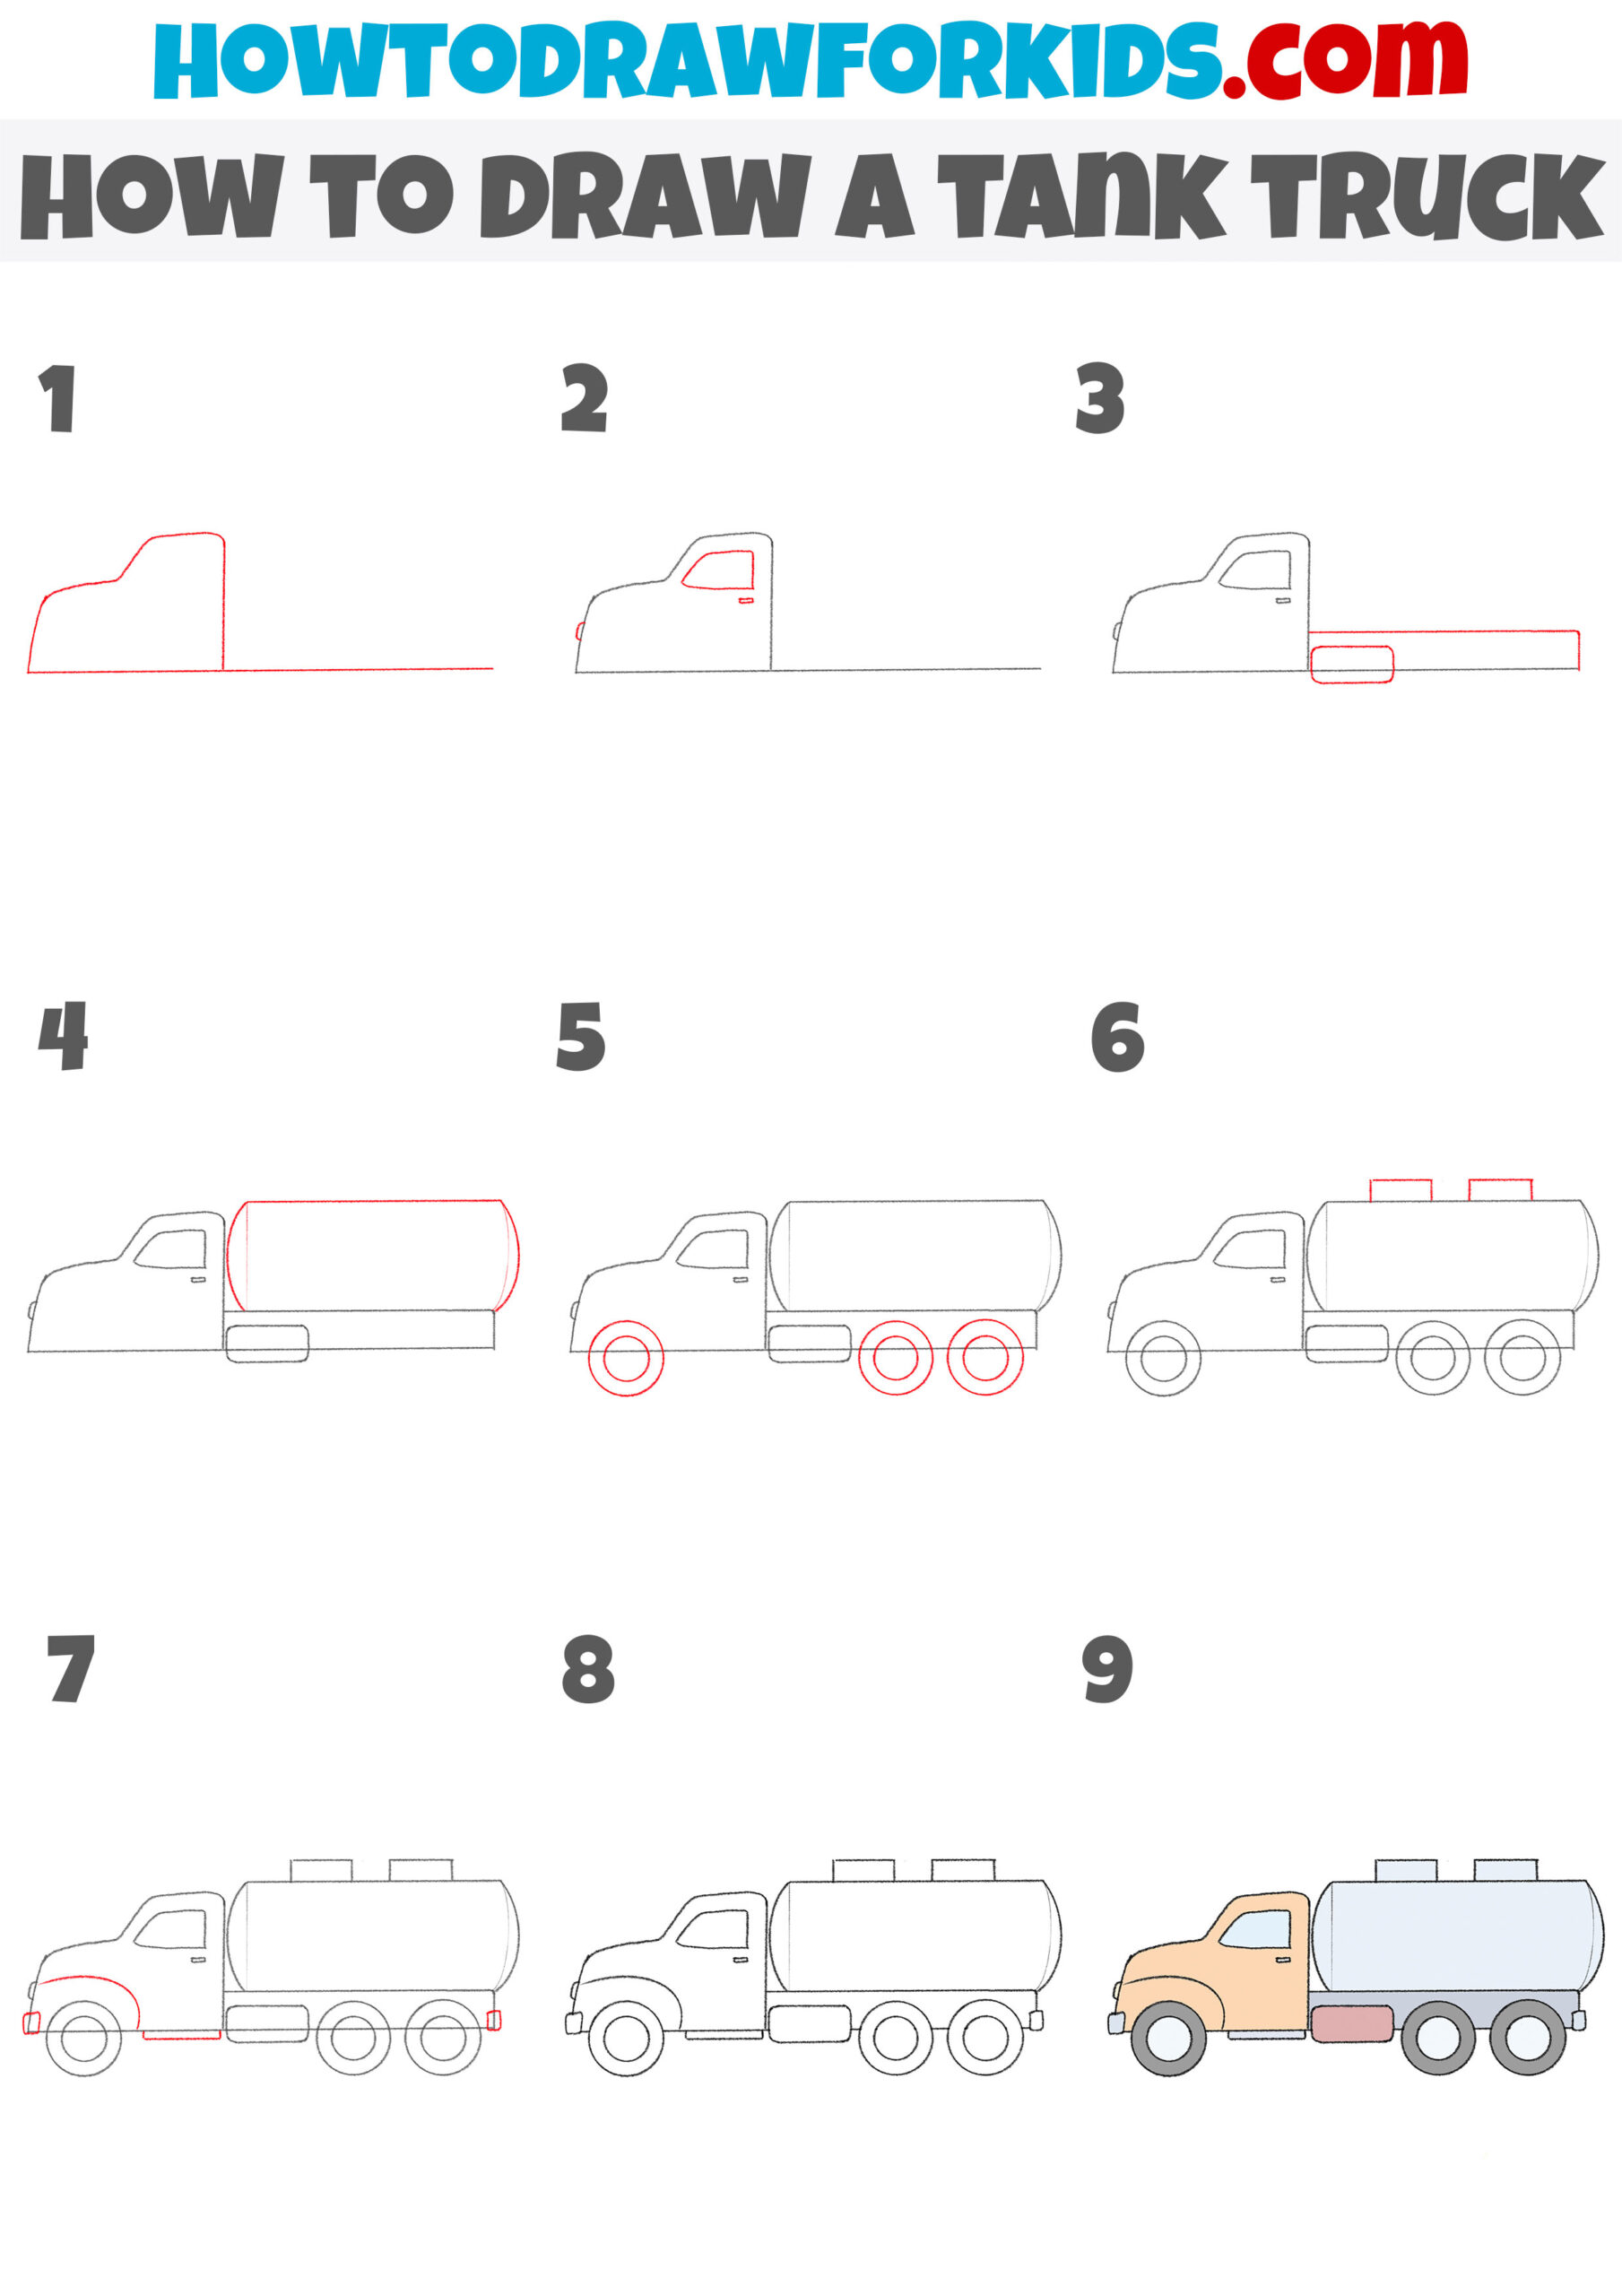 how to draw a tank truck step by step